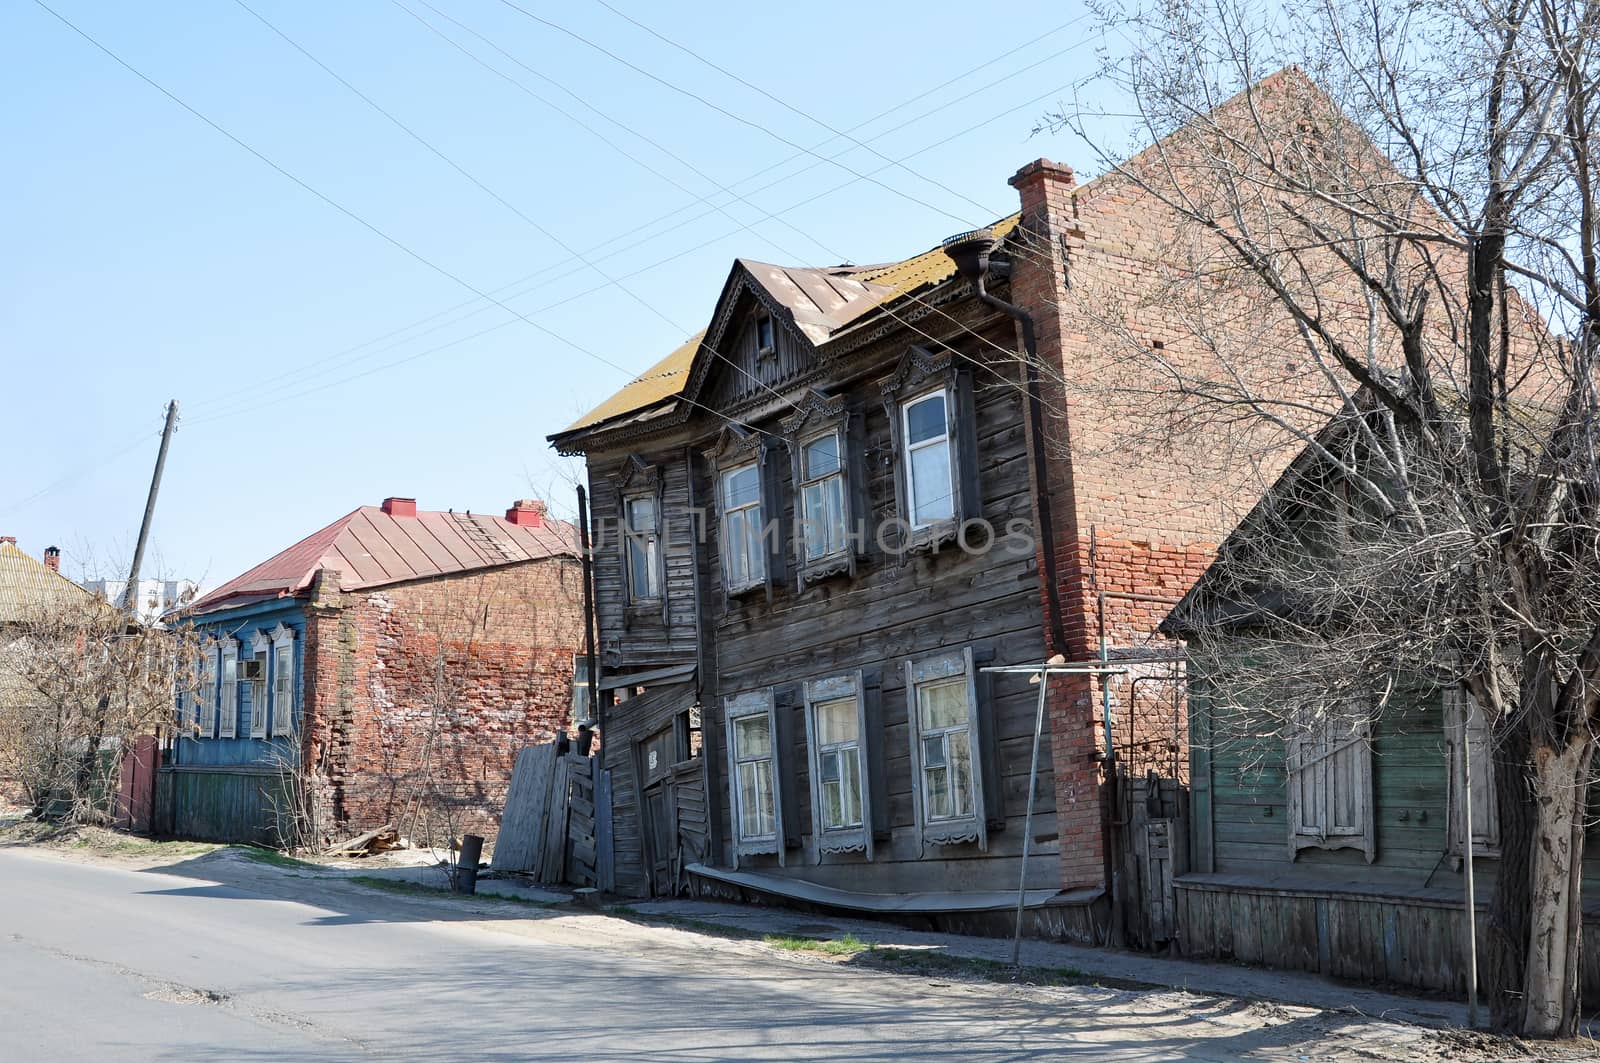 Old wooden rickety house in the city of Astrakhan